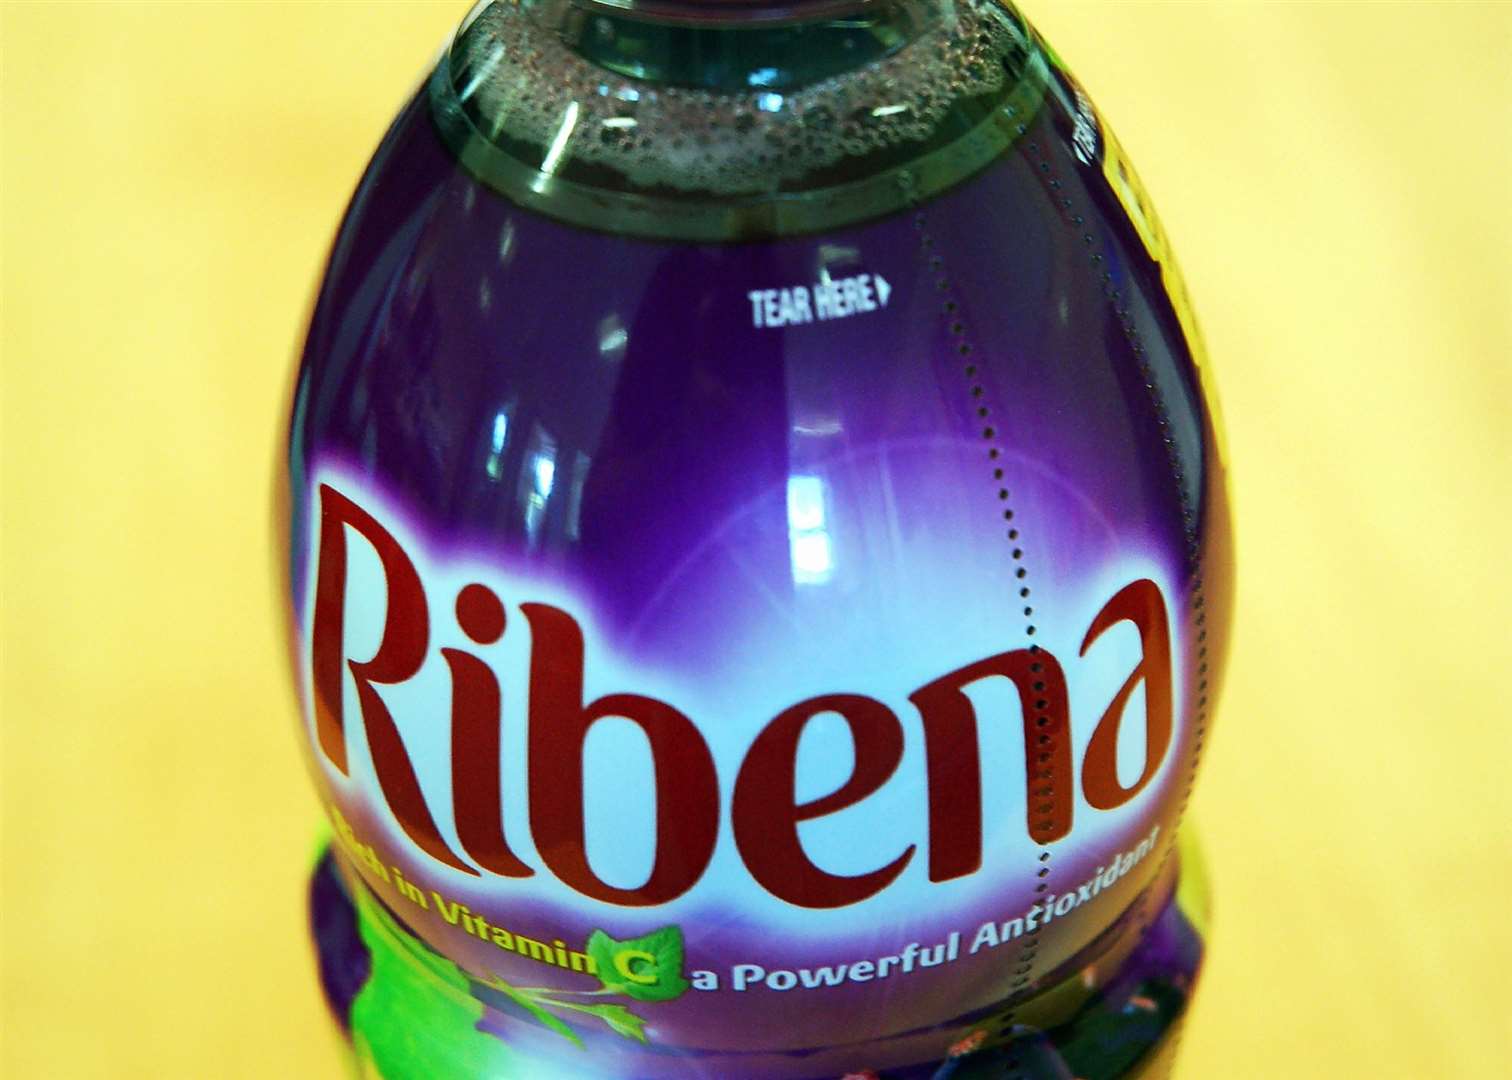 Ribena is among the household names made at the factory where workers are on strike. Image: Stock photo.